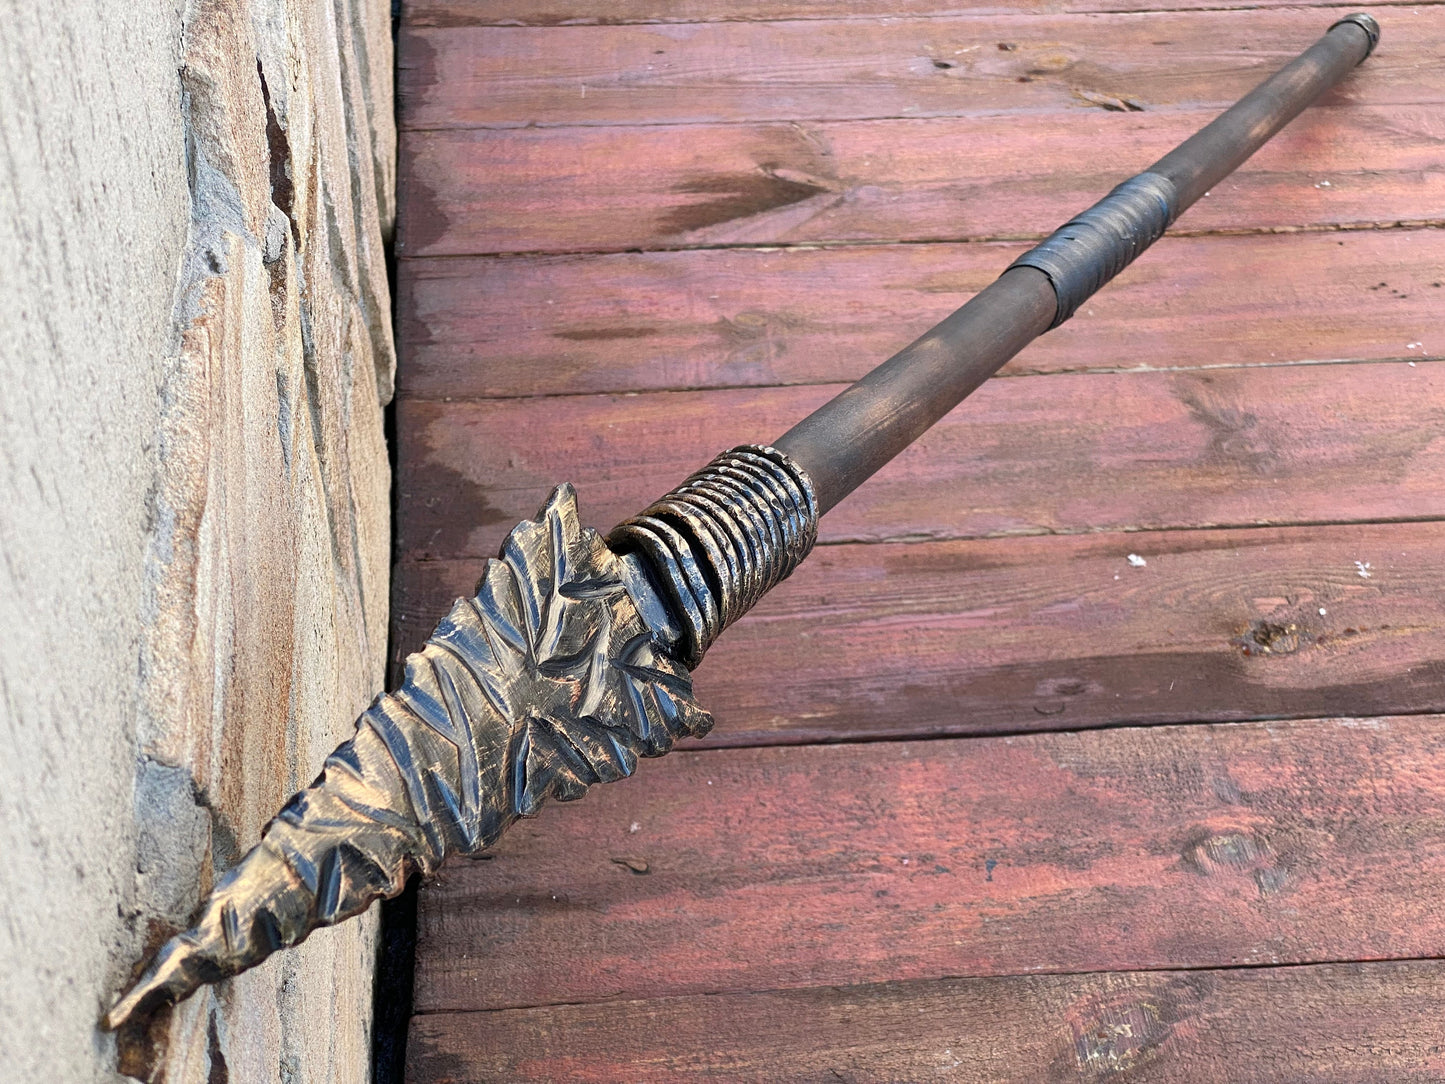 Spear, viking spear, artifact, medieval, birthday, castle, Middle Ages, Christmas, mens gift, steel gift, anniversary, personalized gift,axe